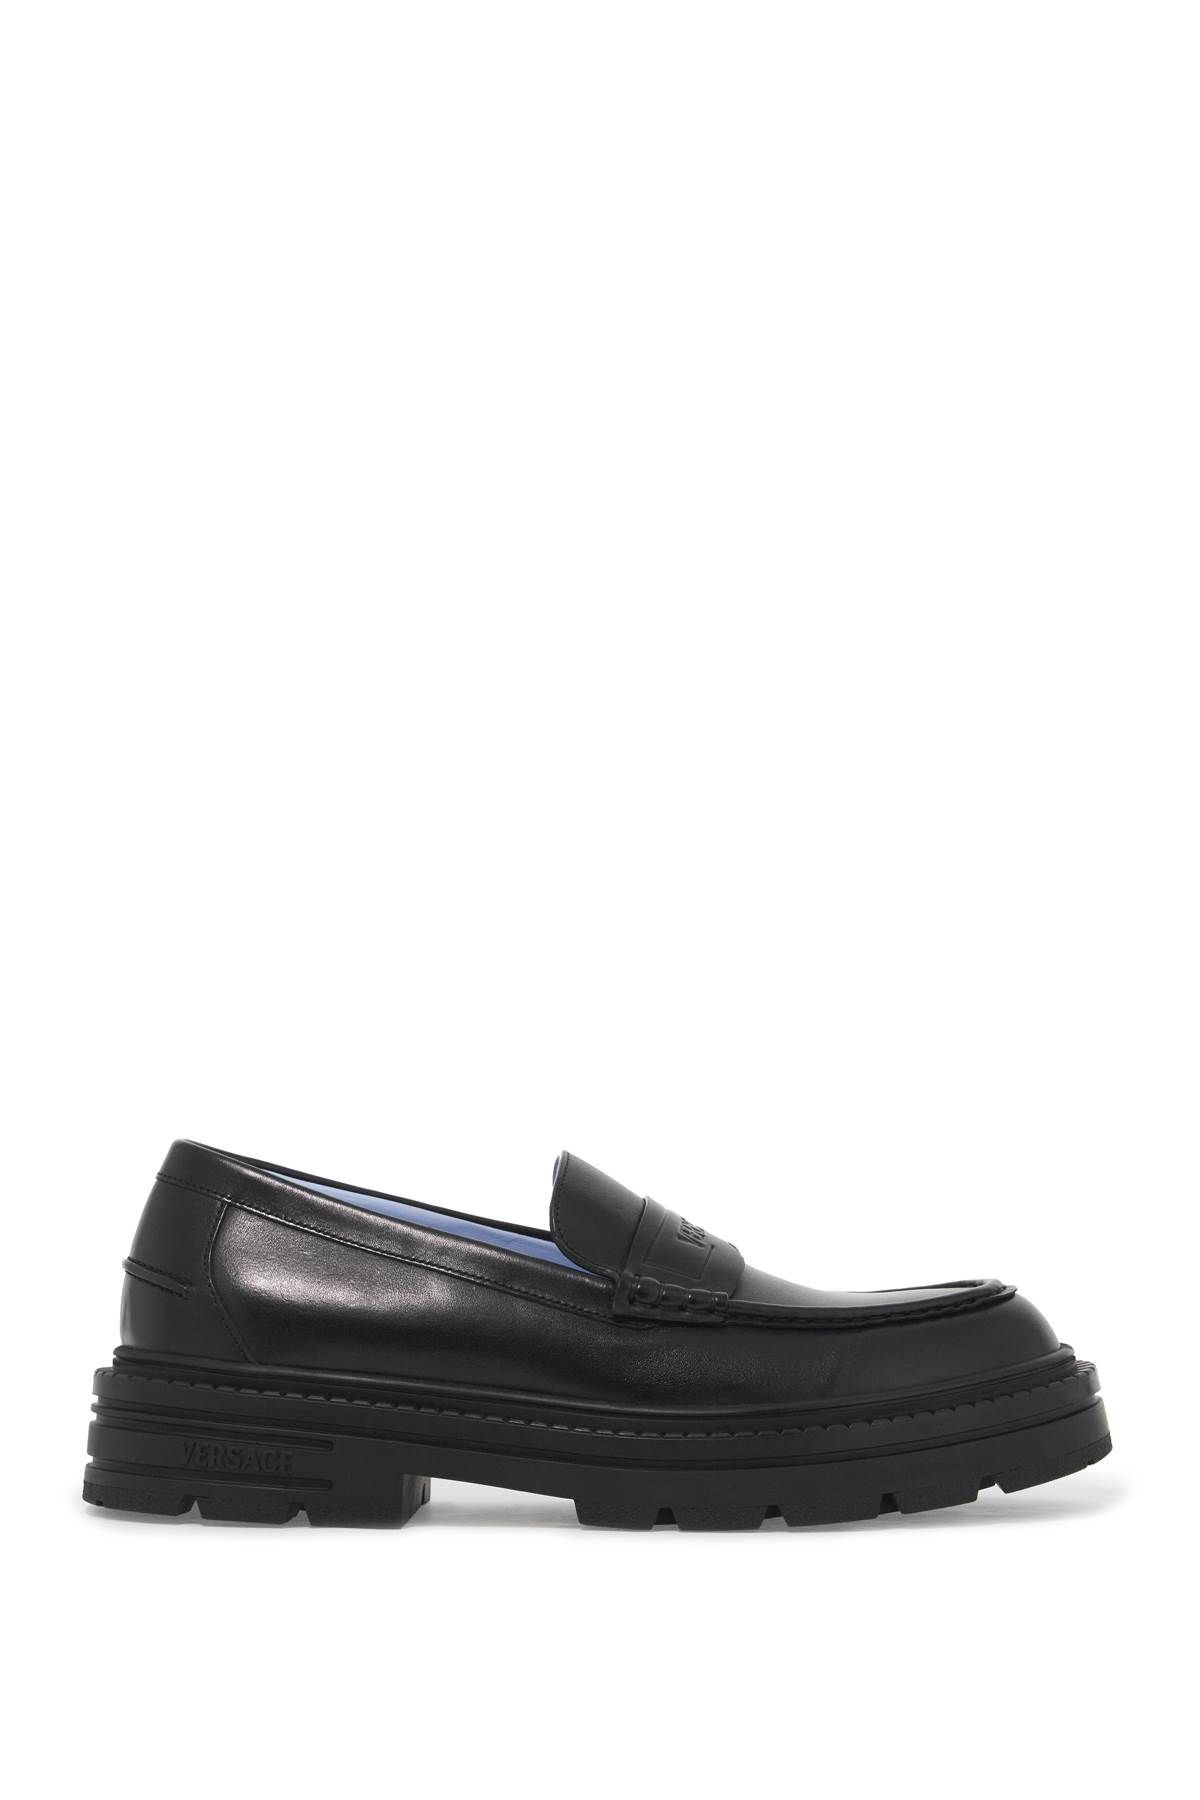 Versace VERSACE smooth leather adriano loafers in